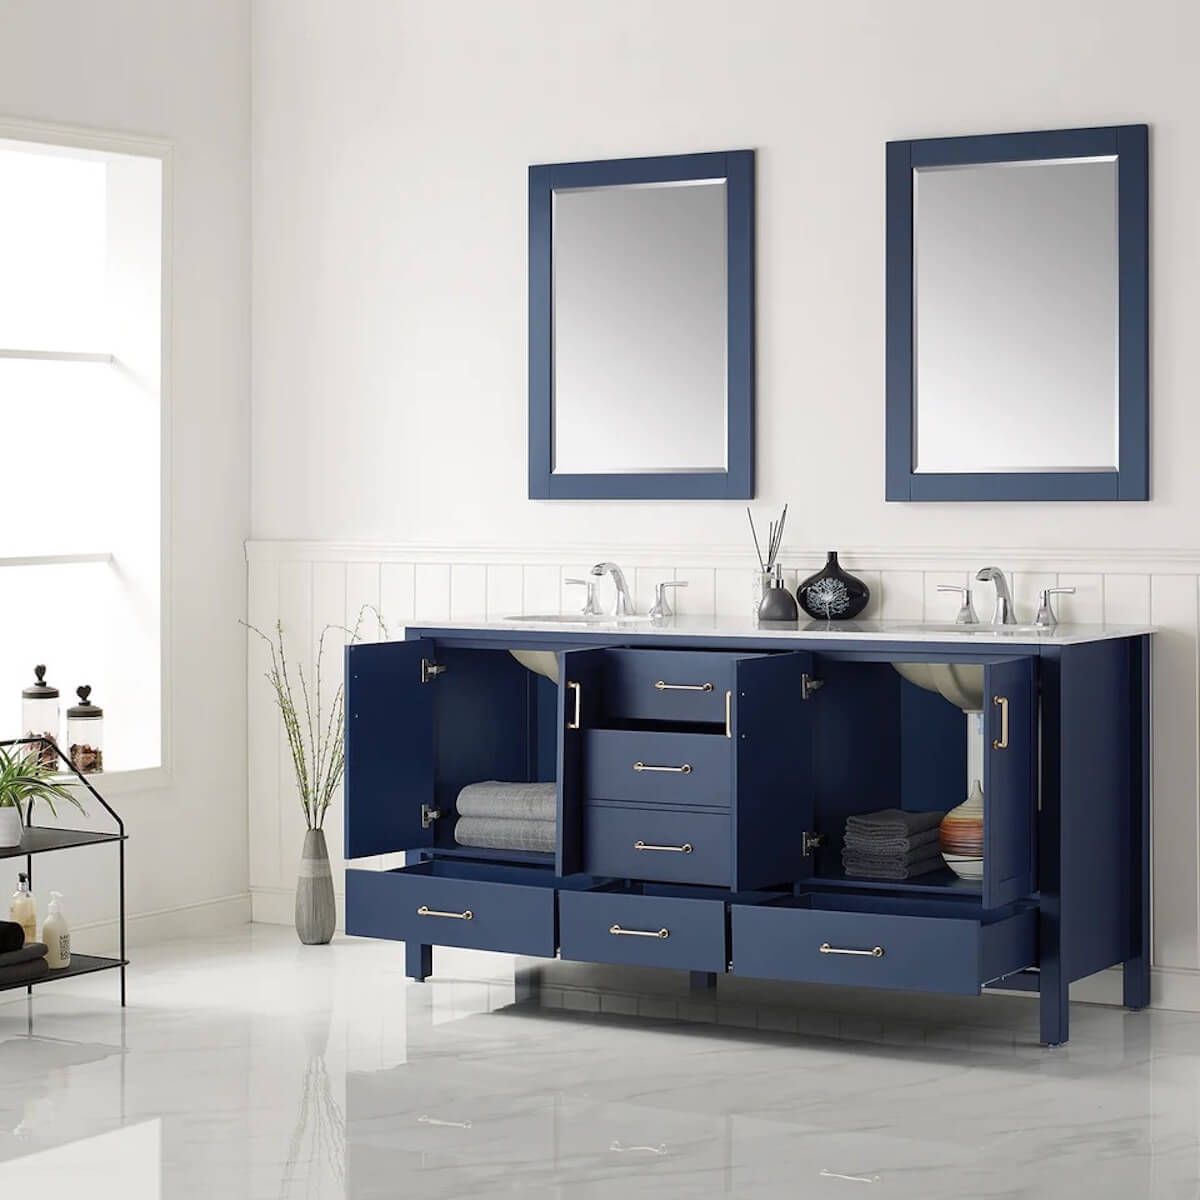 Vinnova 72” Gela Royal Blue Freestanding Double Vanity with Carrara White Marble Countertop With Mirror Inside 723072-RB-CA